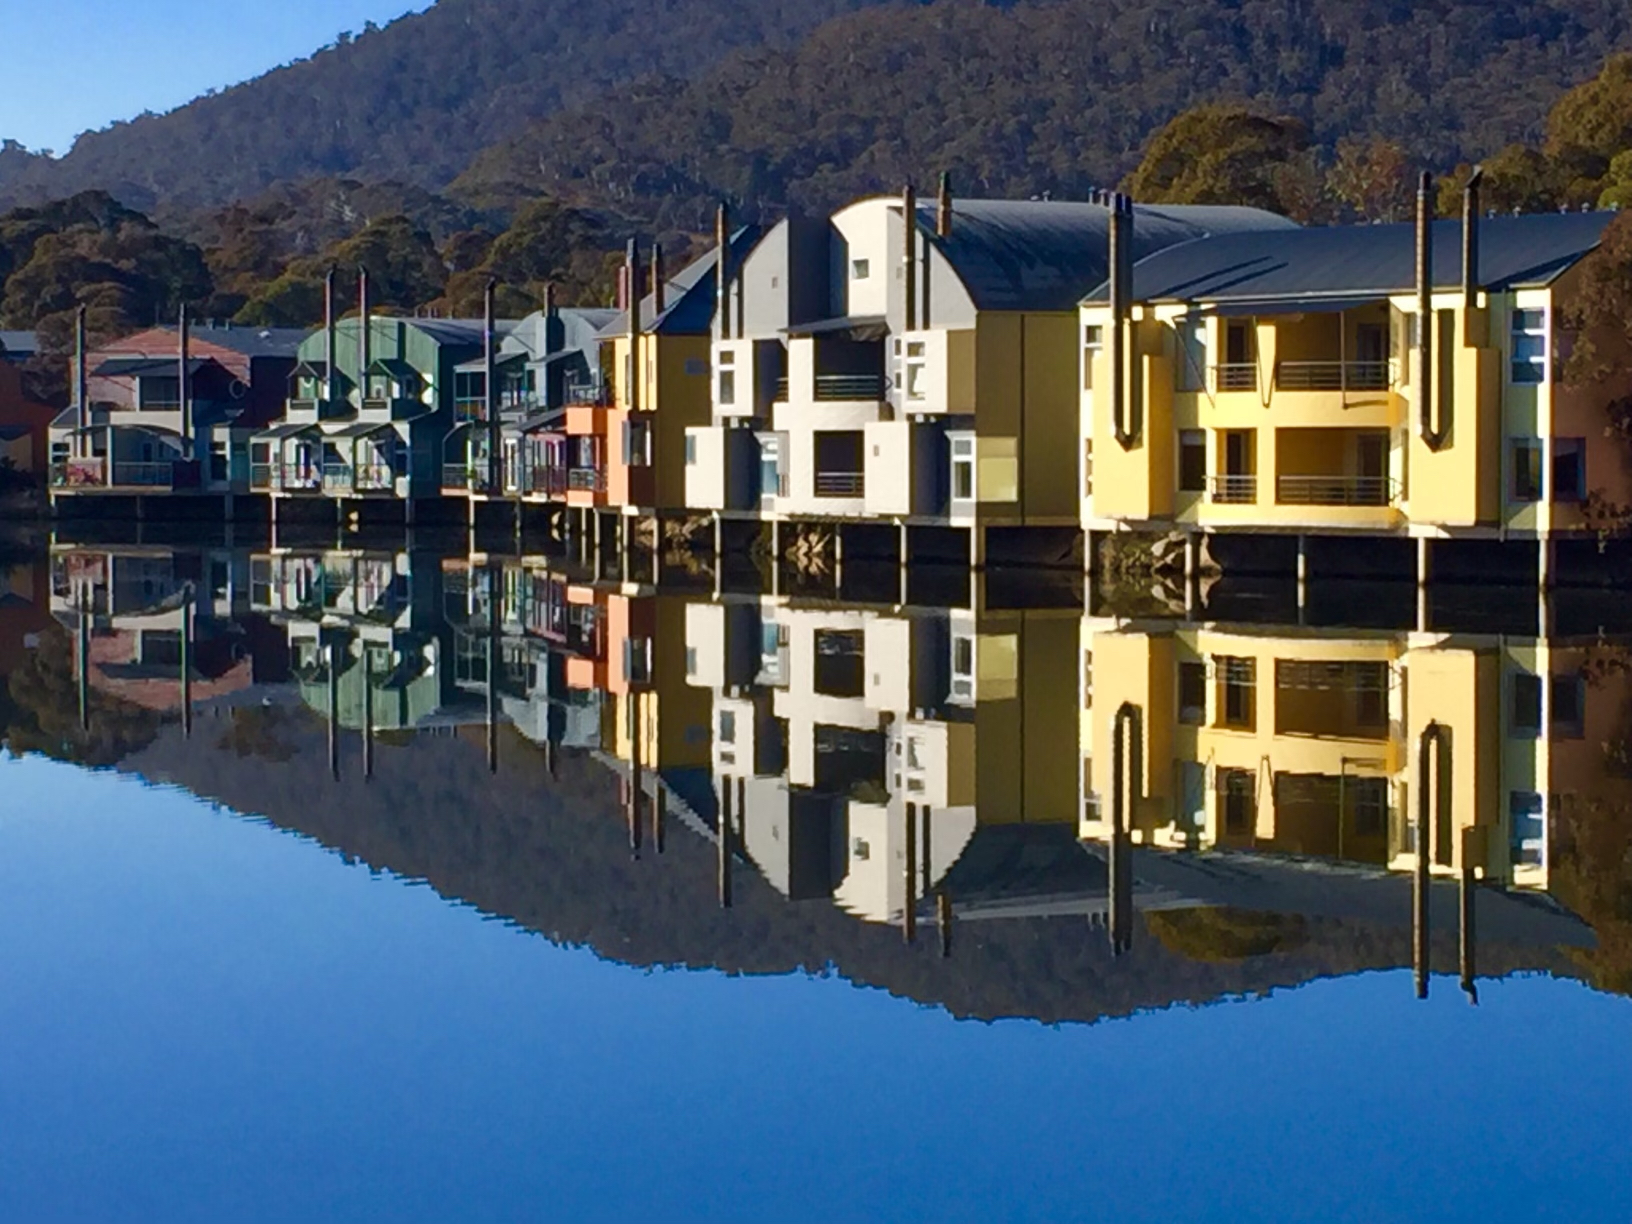 Lake Crackenback, Two Bedroom + Loft Lakeside Apartment – Price: Offers invited over $700,000